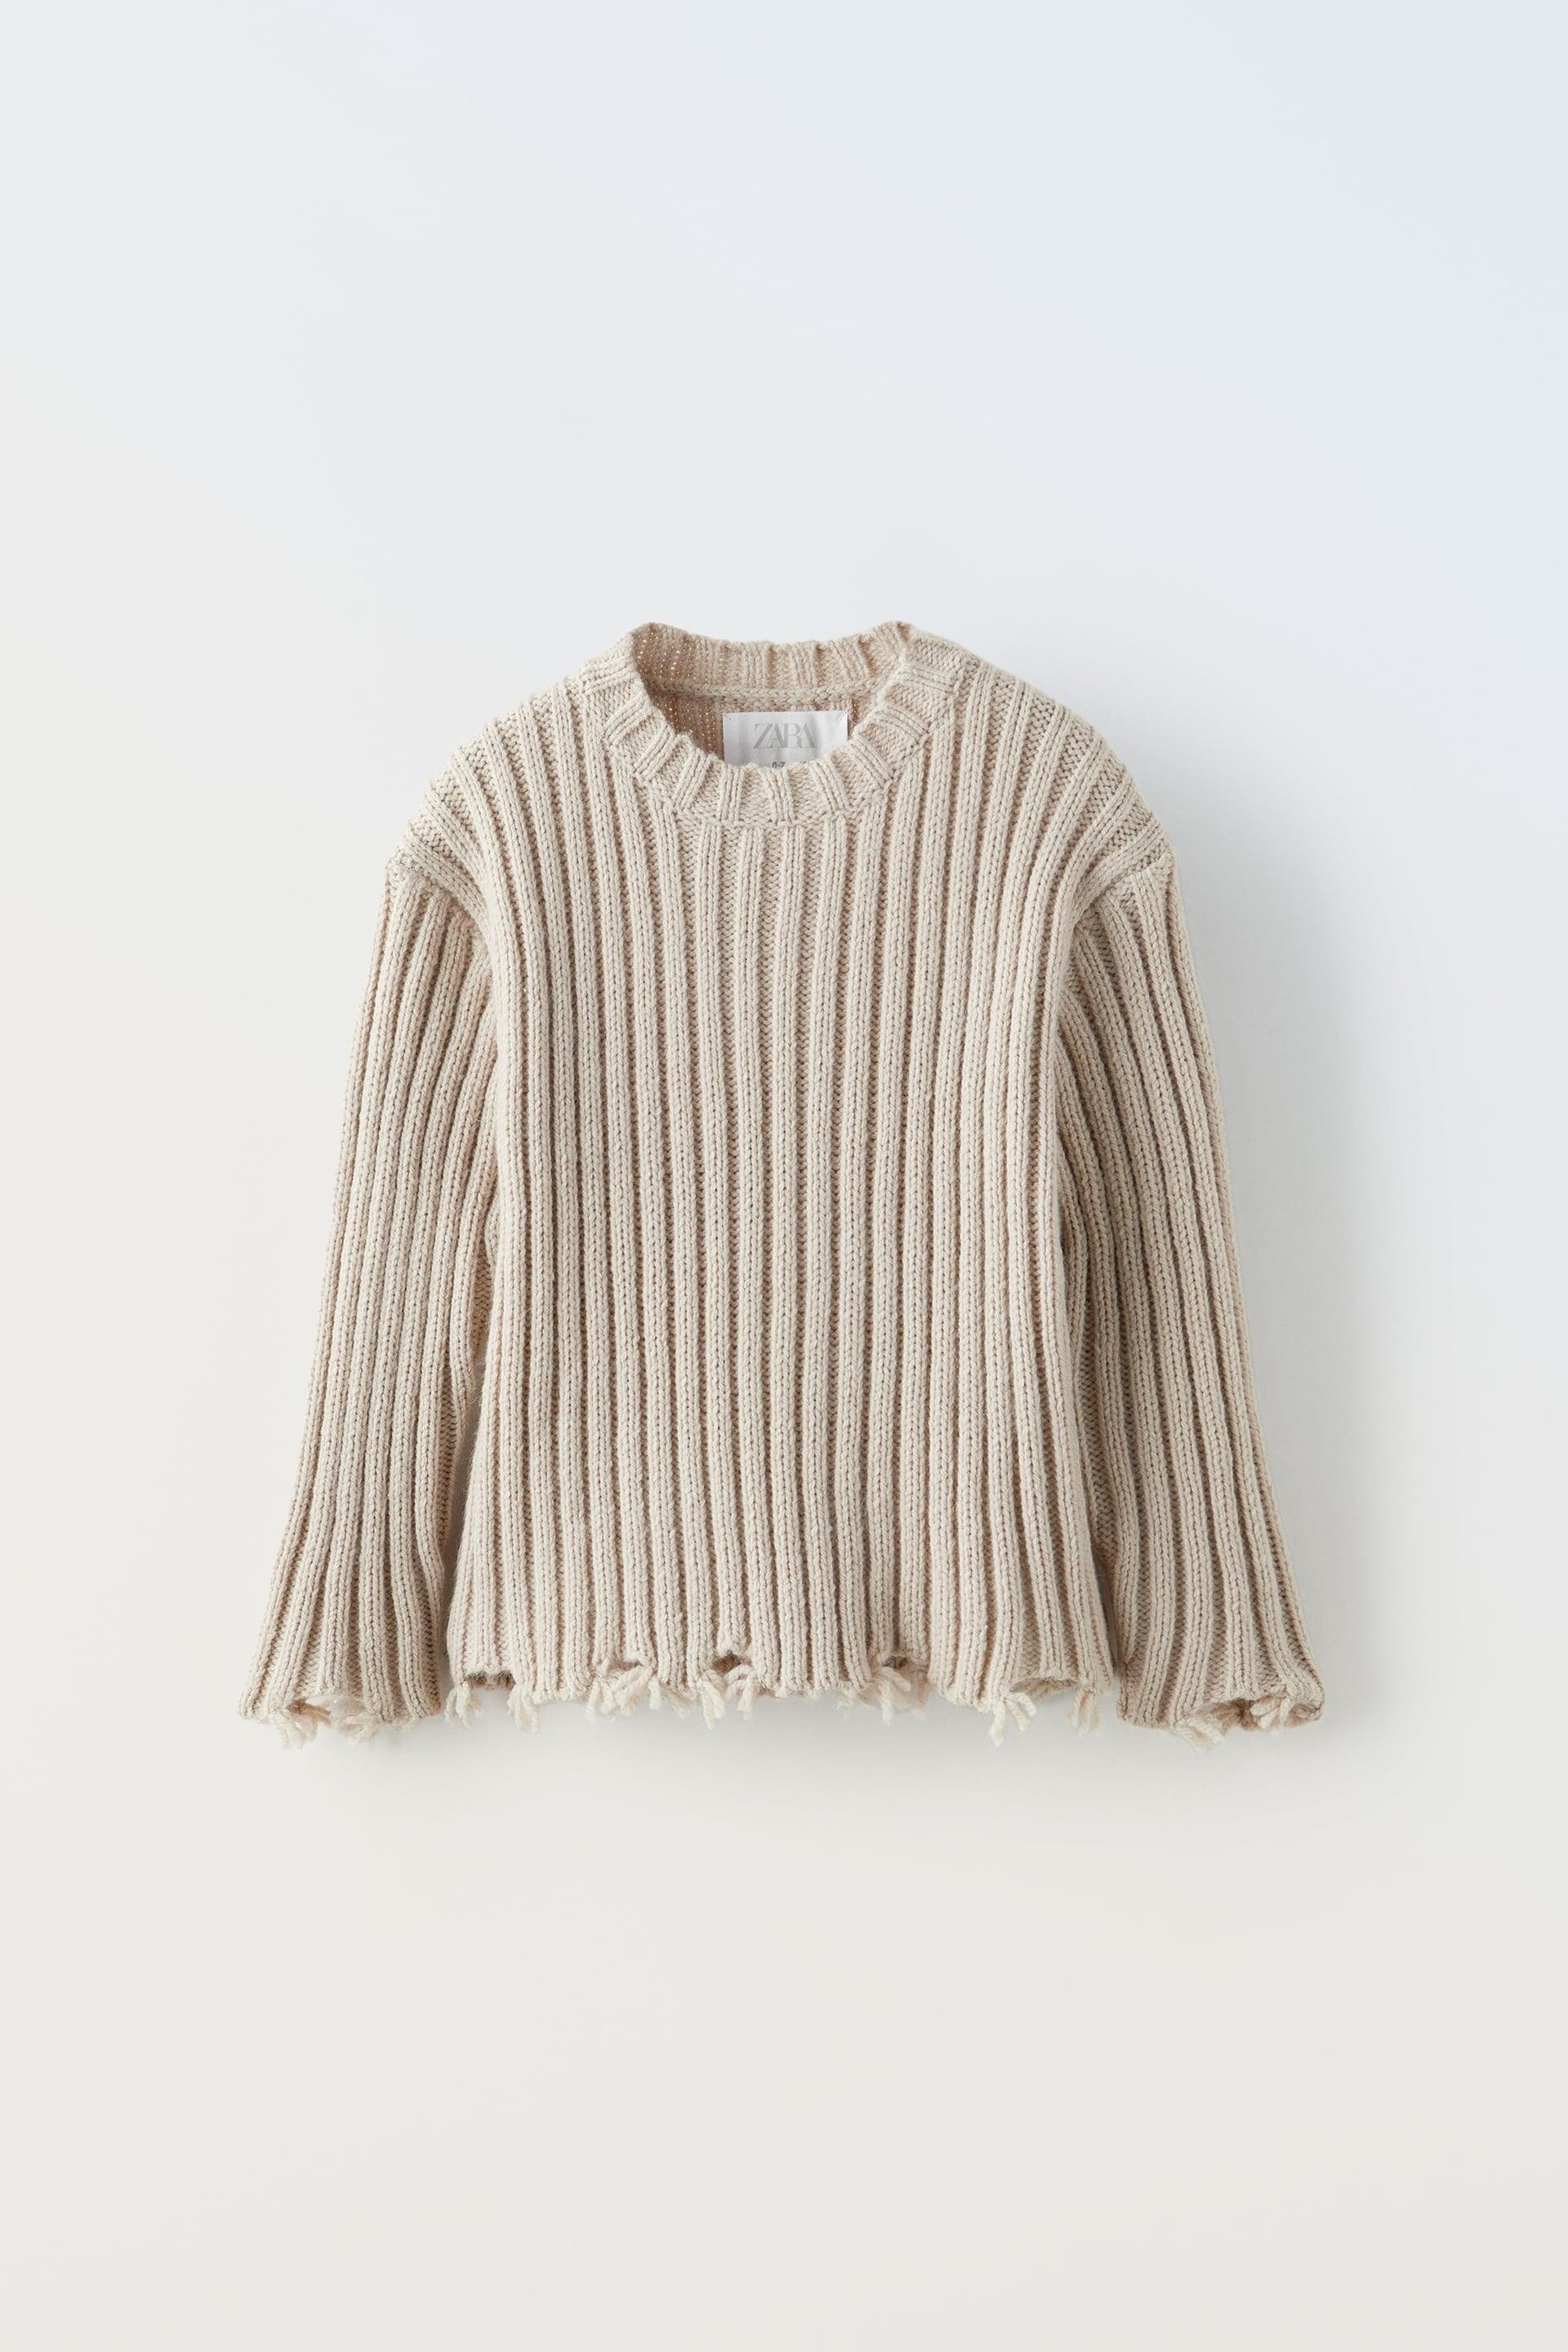 RIPPED RIBBED SWEATER by ZARA